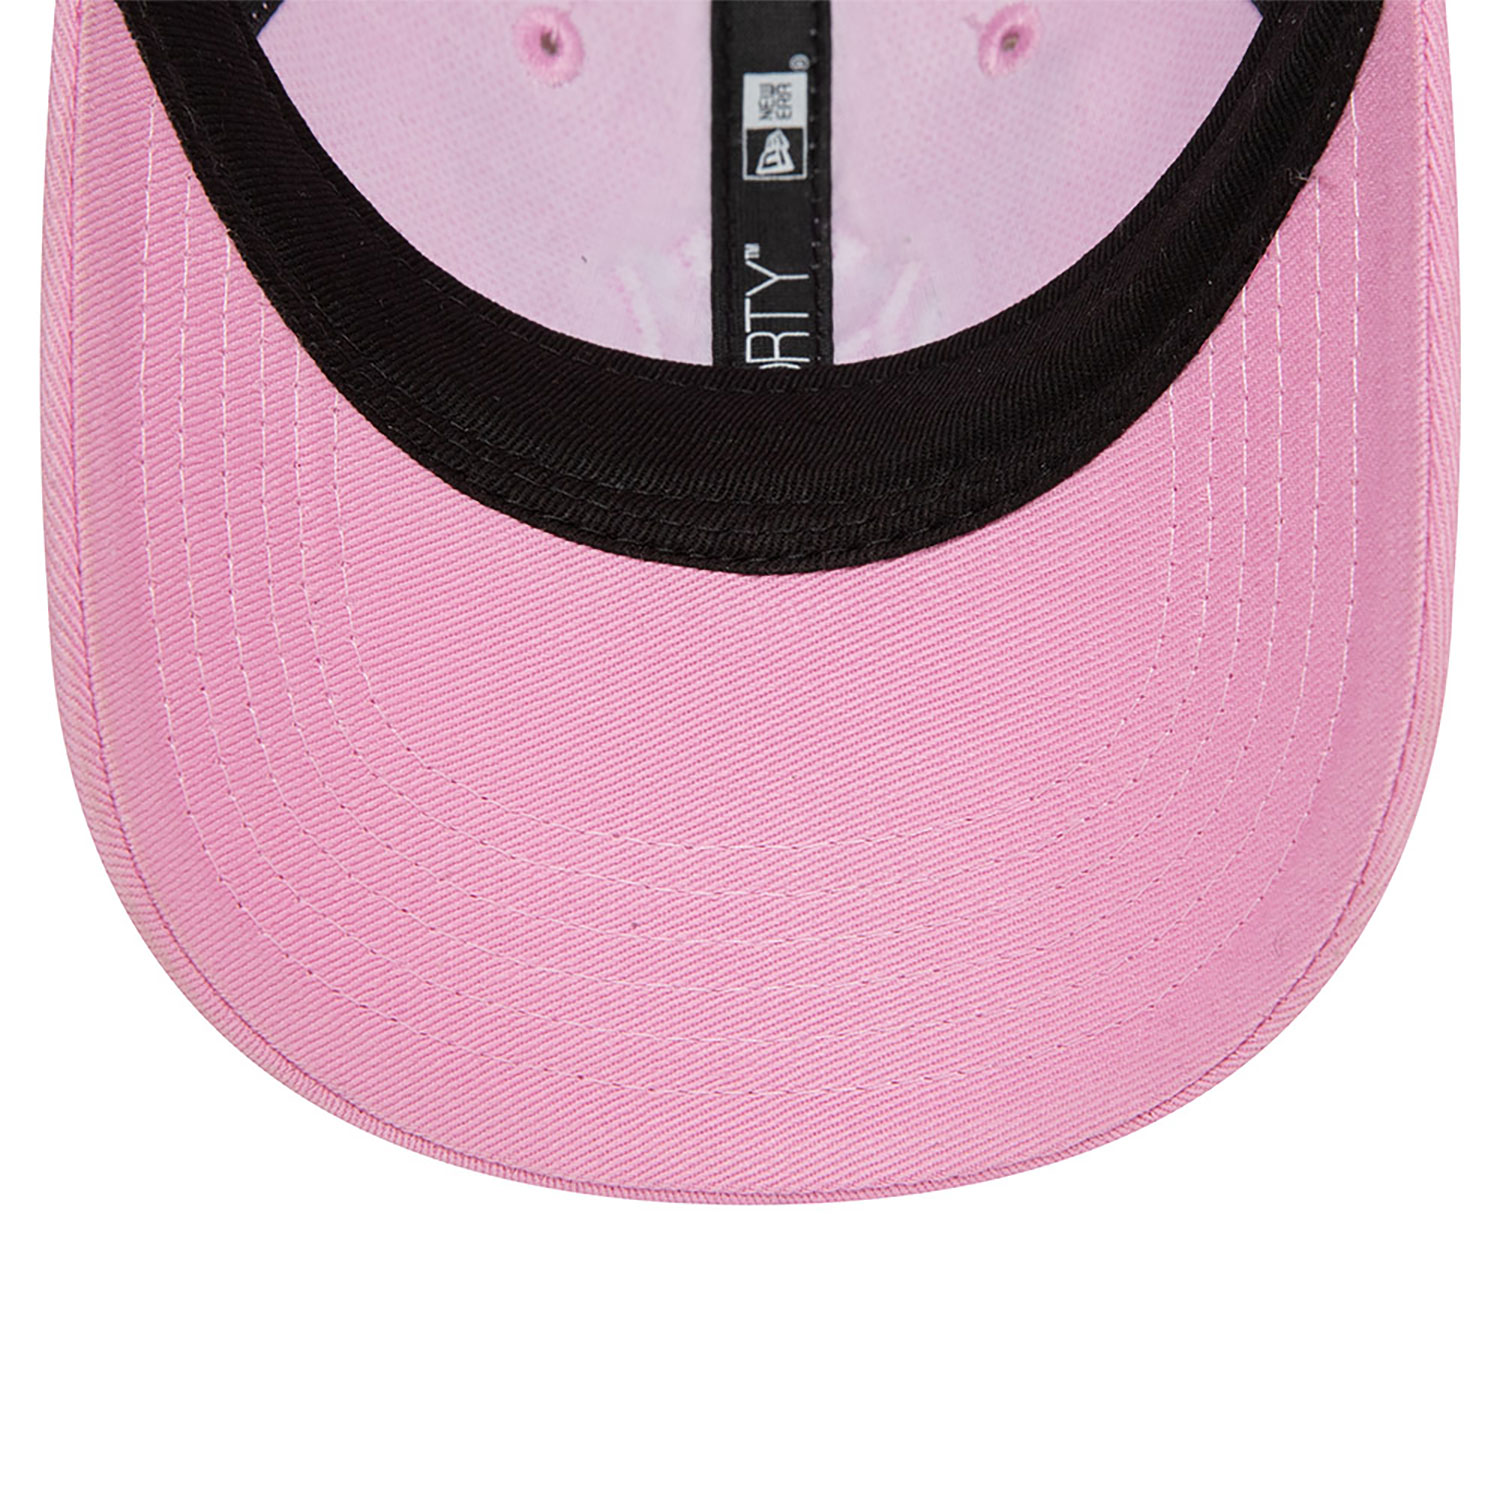 New York Yankees Toddler League Essential Pink 9FORTY Adjustable Cap